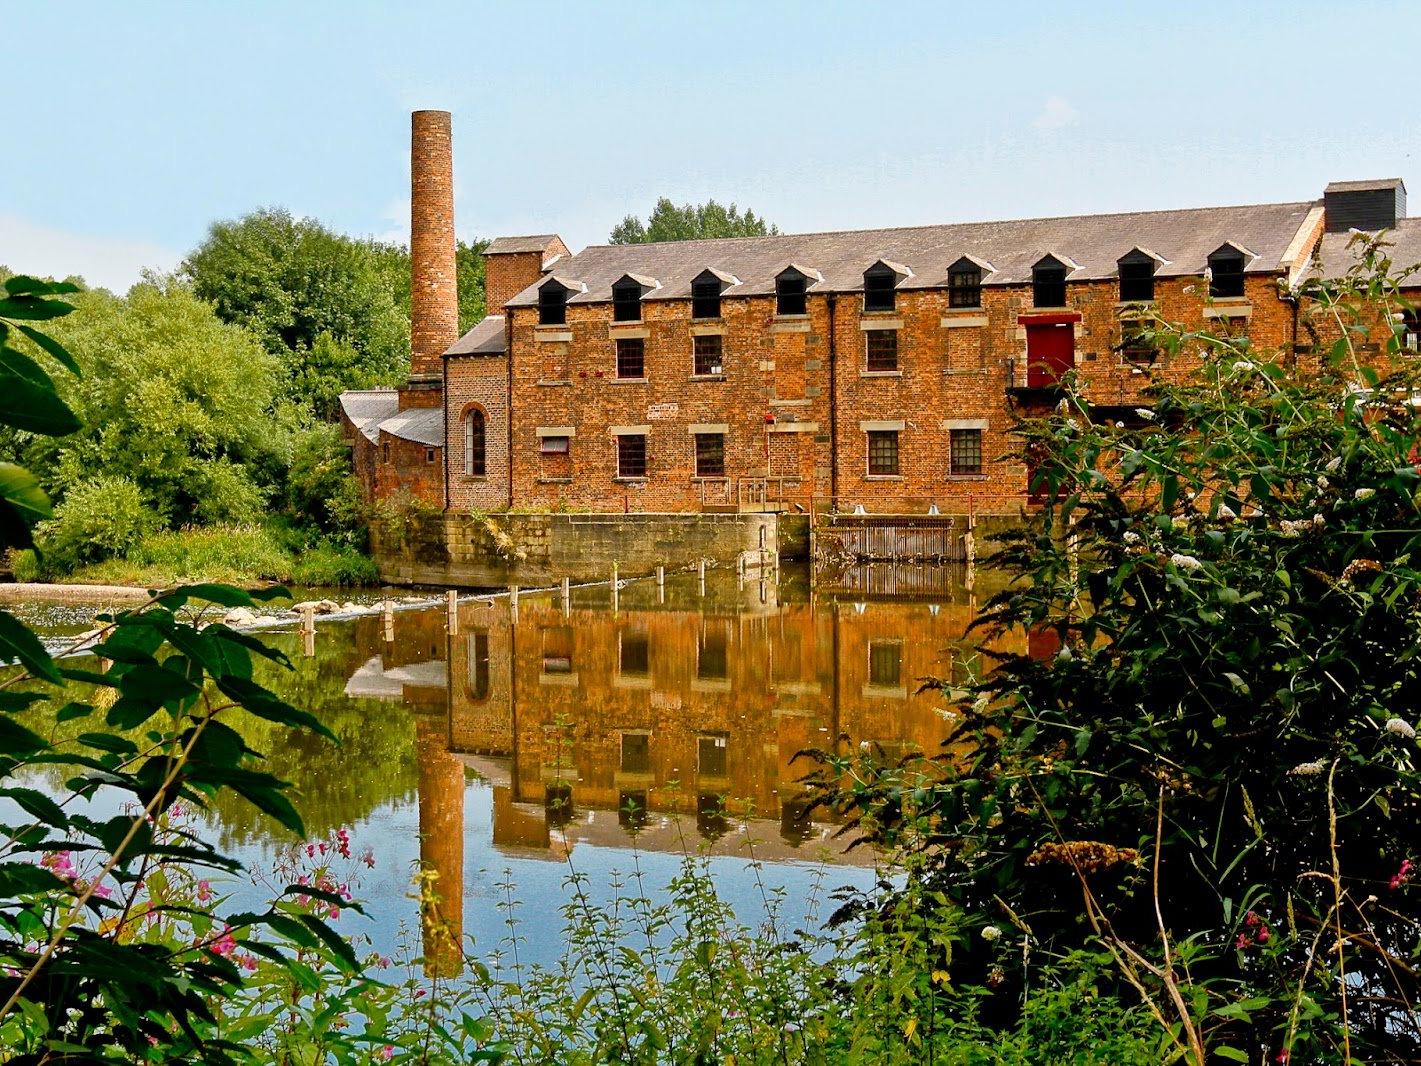 One of the countrys last remaining water mills, Thwaite Watermill will be holding a day of experiments on Oct 31 from 1-3pm. Visitors can design and make a dancing Halloween robot, ready for a jitterbug boogie at the Monster Mash.